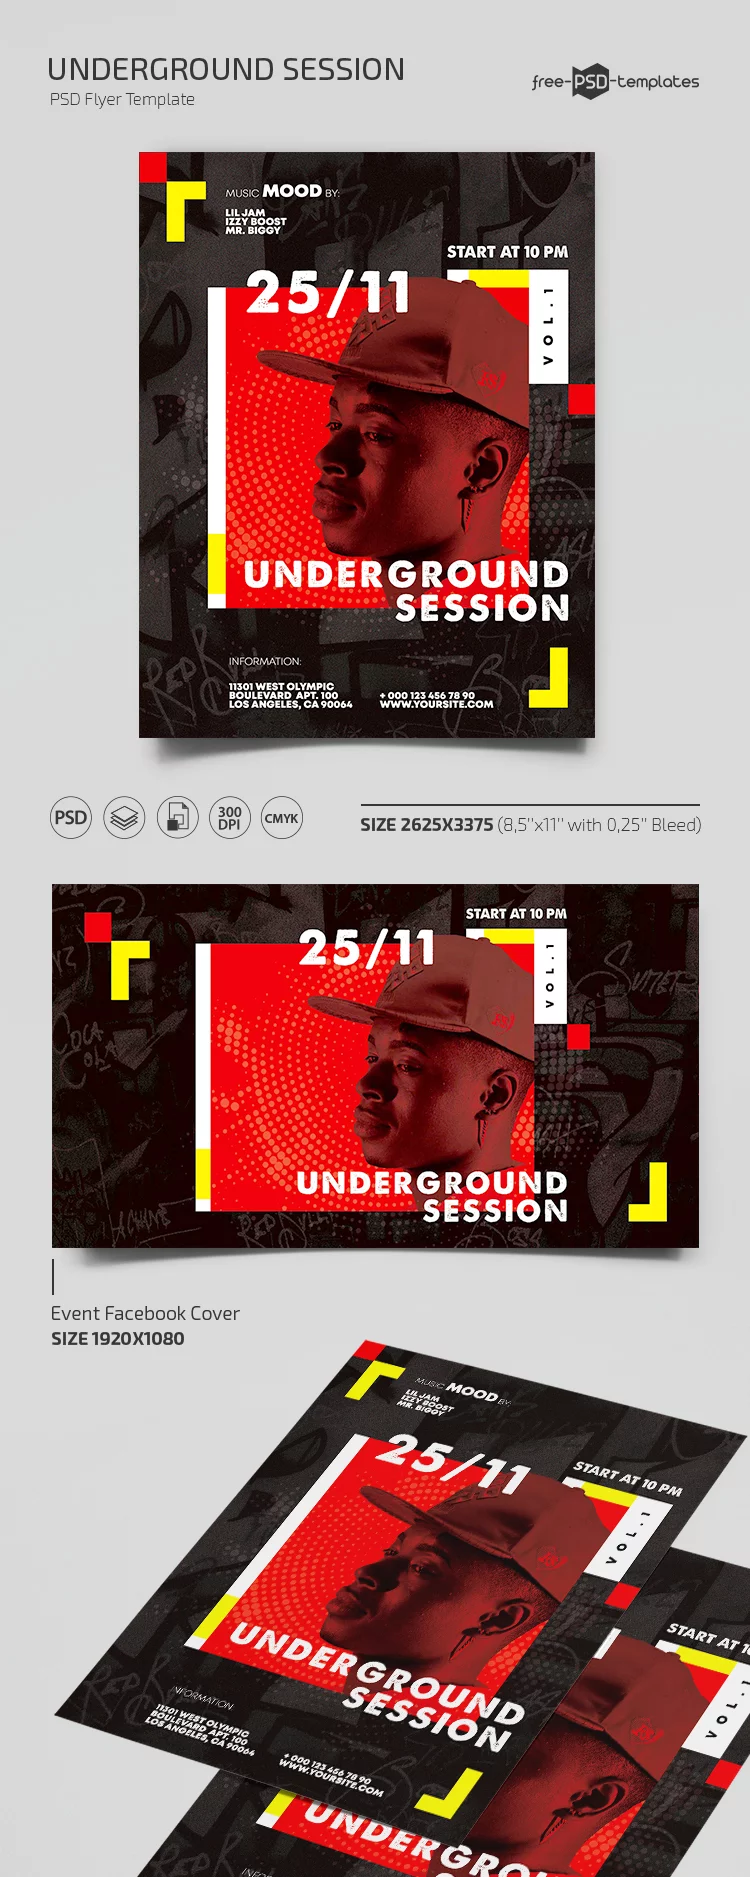 Free Underground Session Flyer Template in PSD